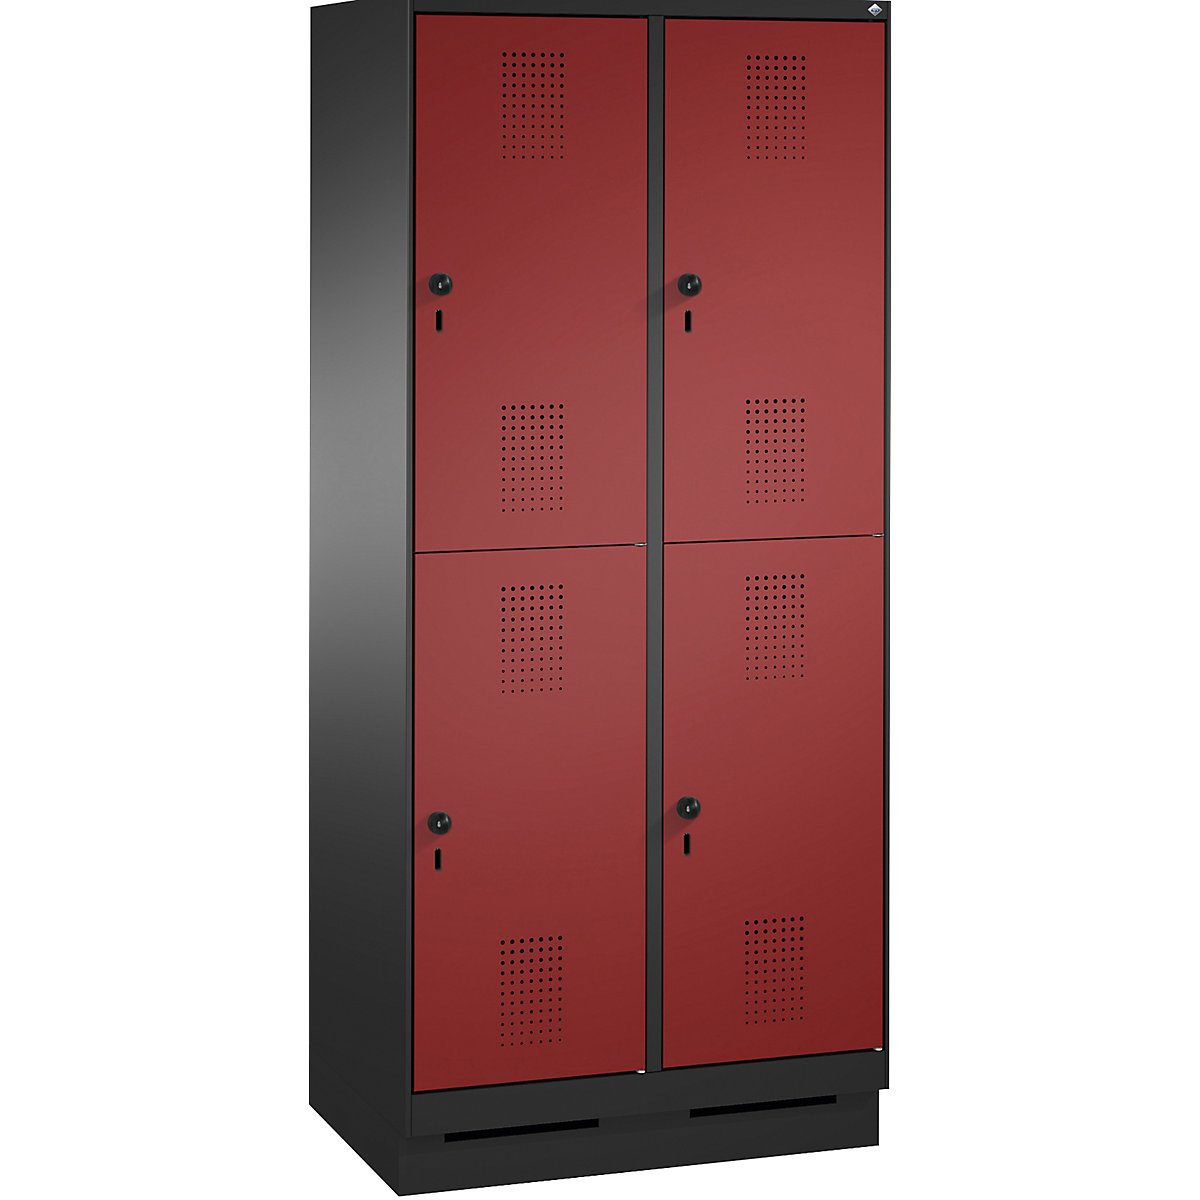 EVOLO cloakroom locker, double tier, with plinth – C+P, 2 compartments, 2 shelf compartments each, compartment width 400 mm, black grey / ruby red-10